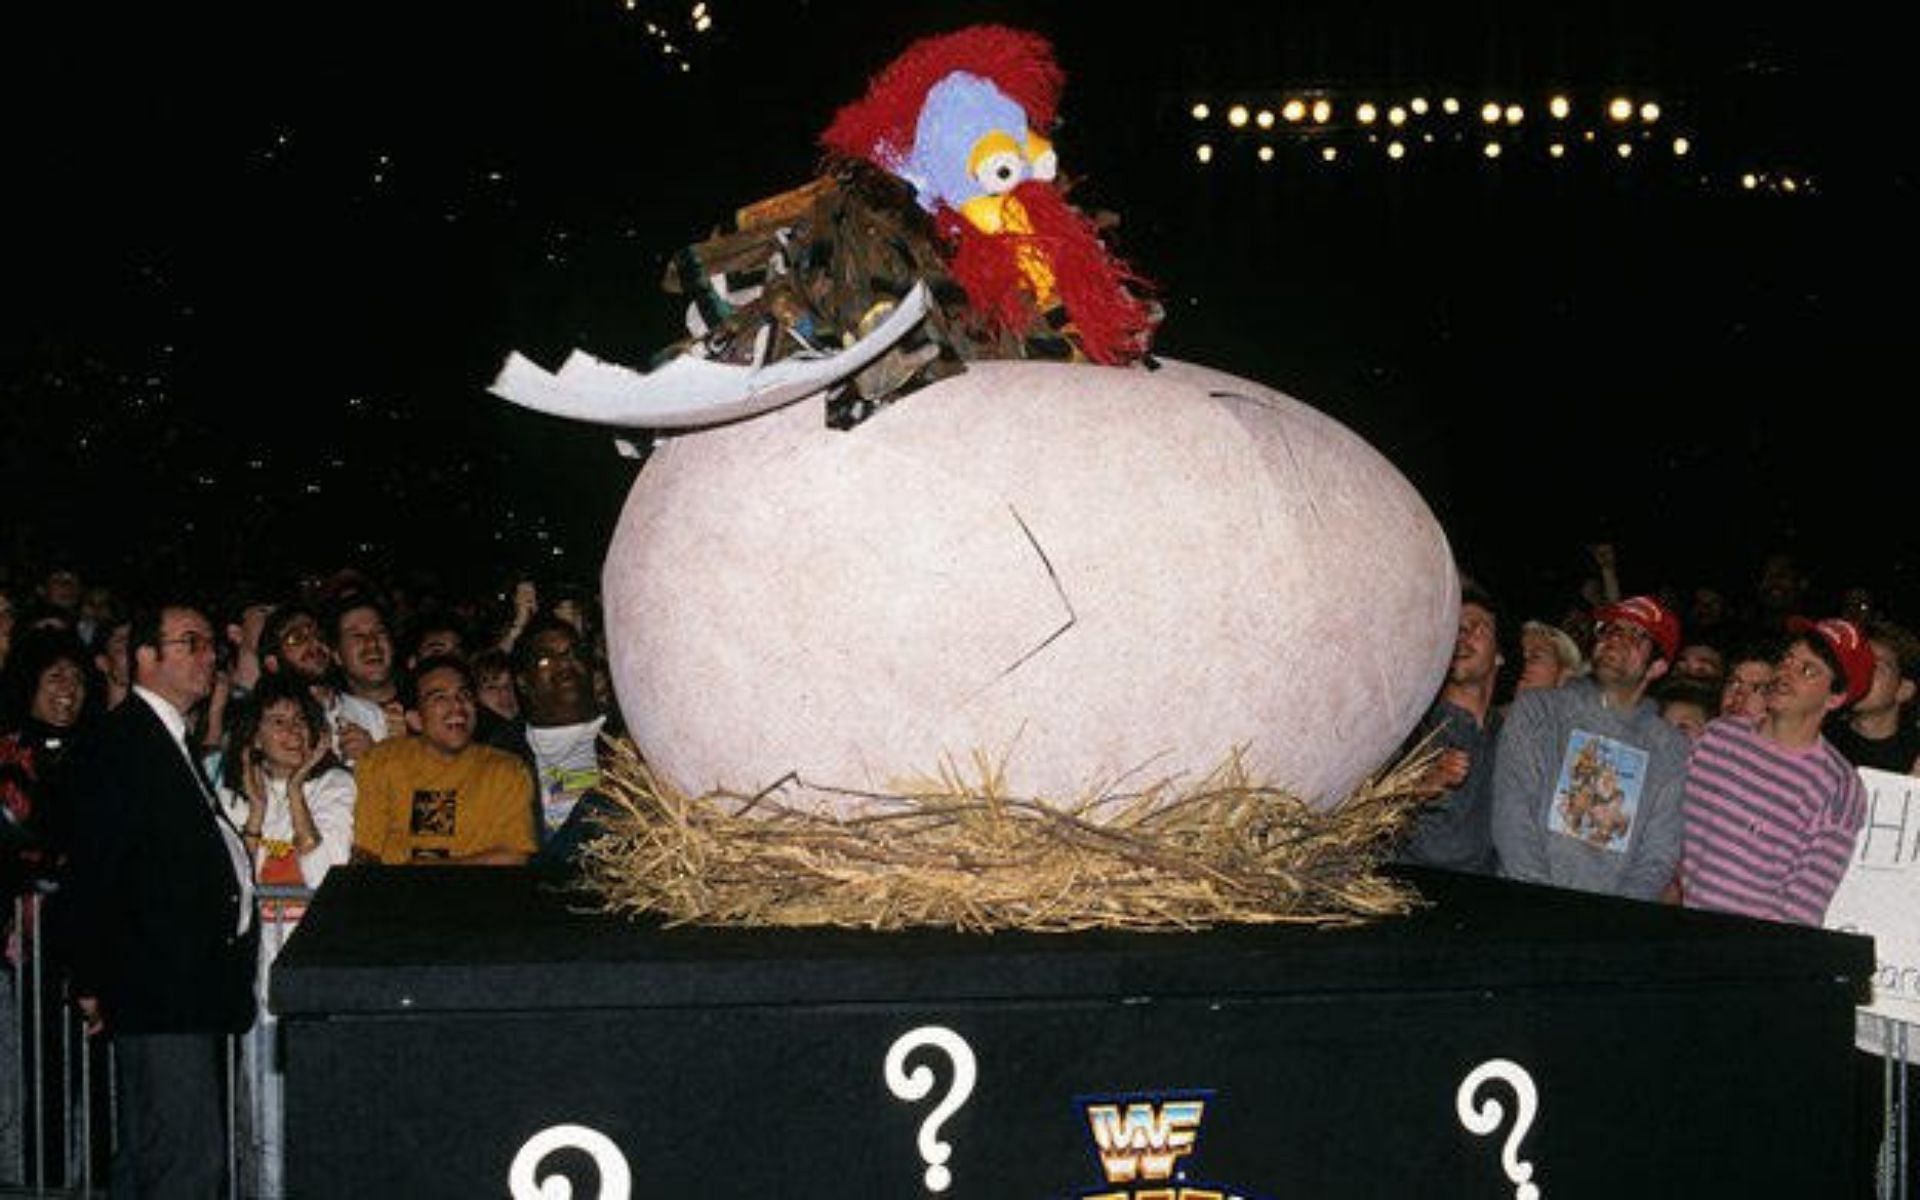 Fans react as The Goobledy Gooker hatches from a giant egg!